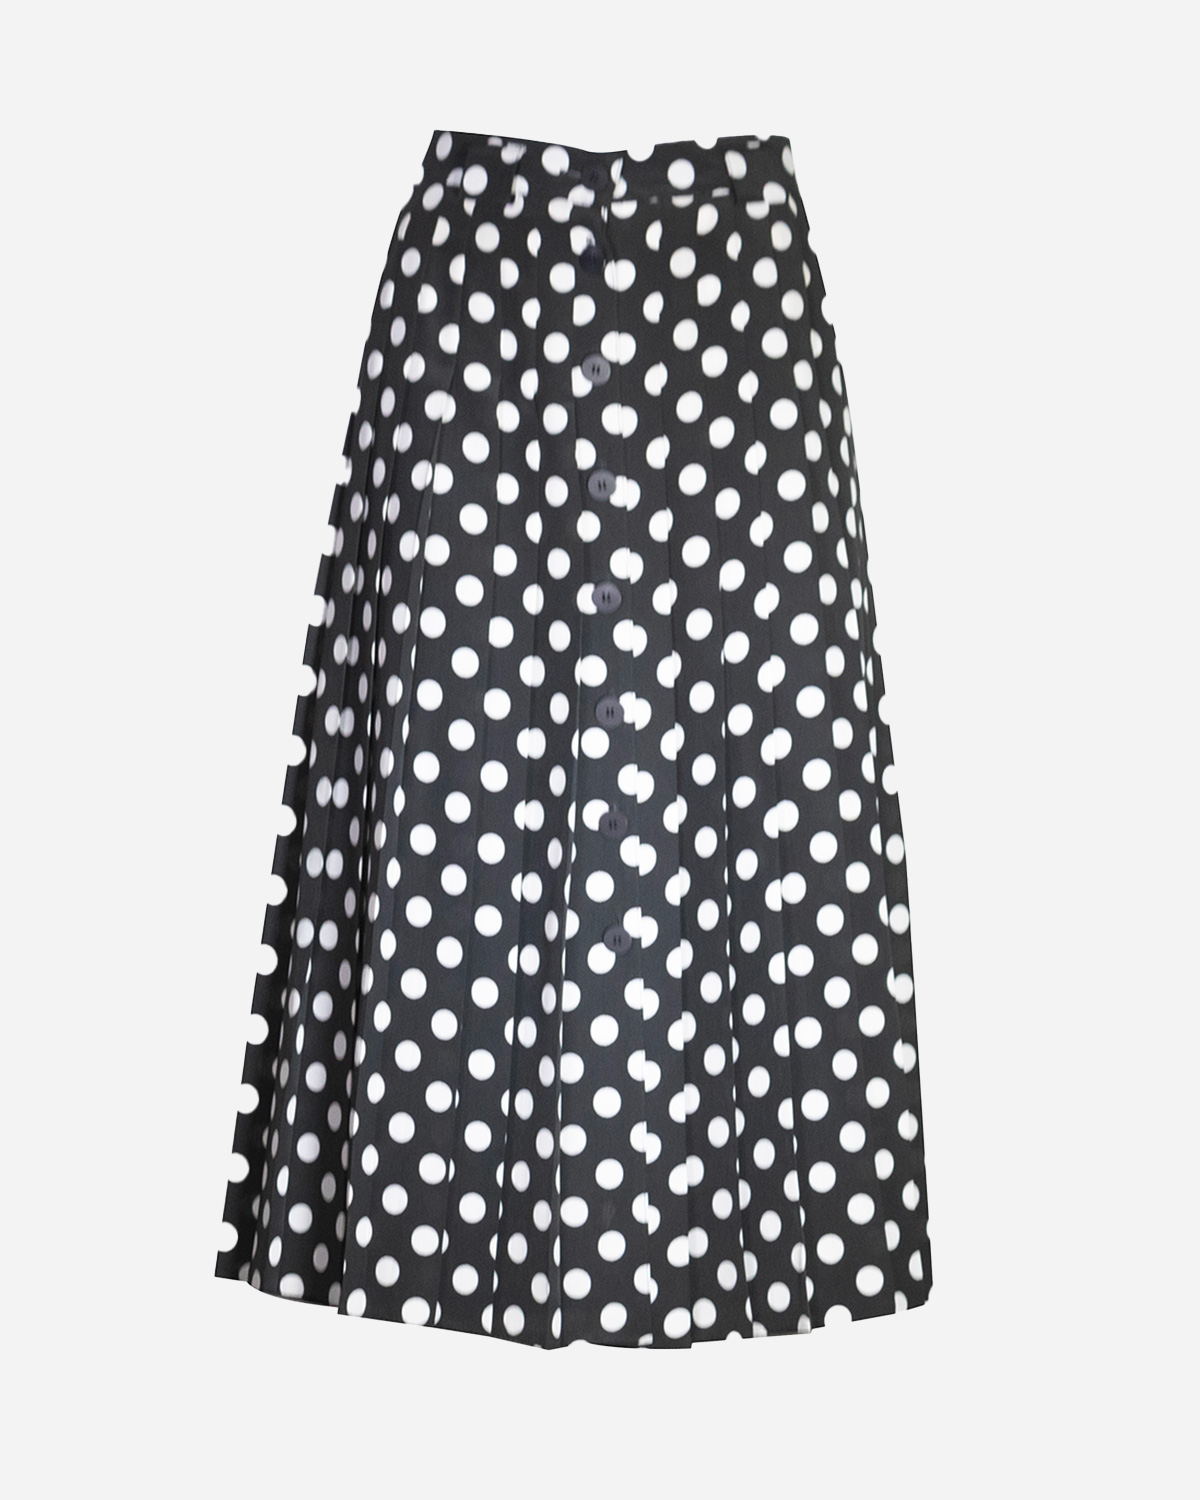 Polka dots patterned skirts for women: 4 pieces